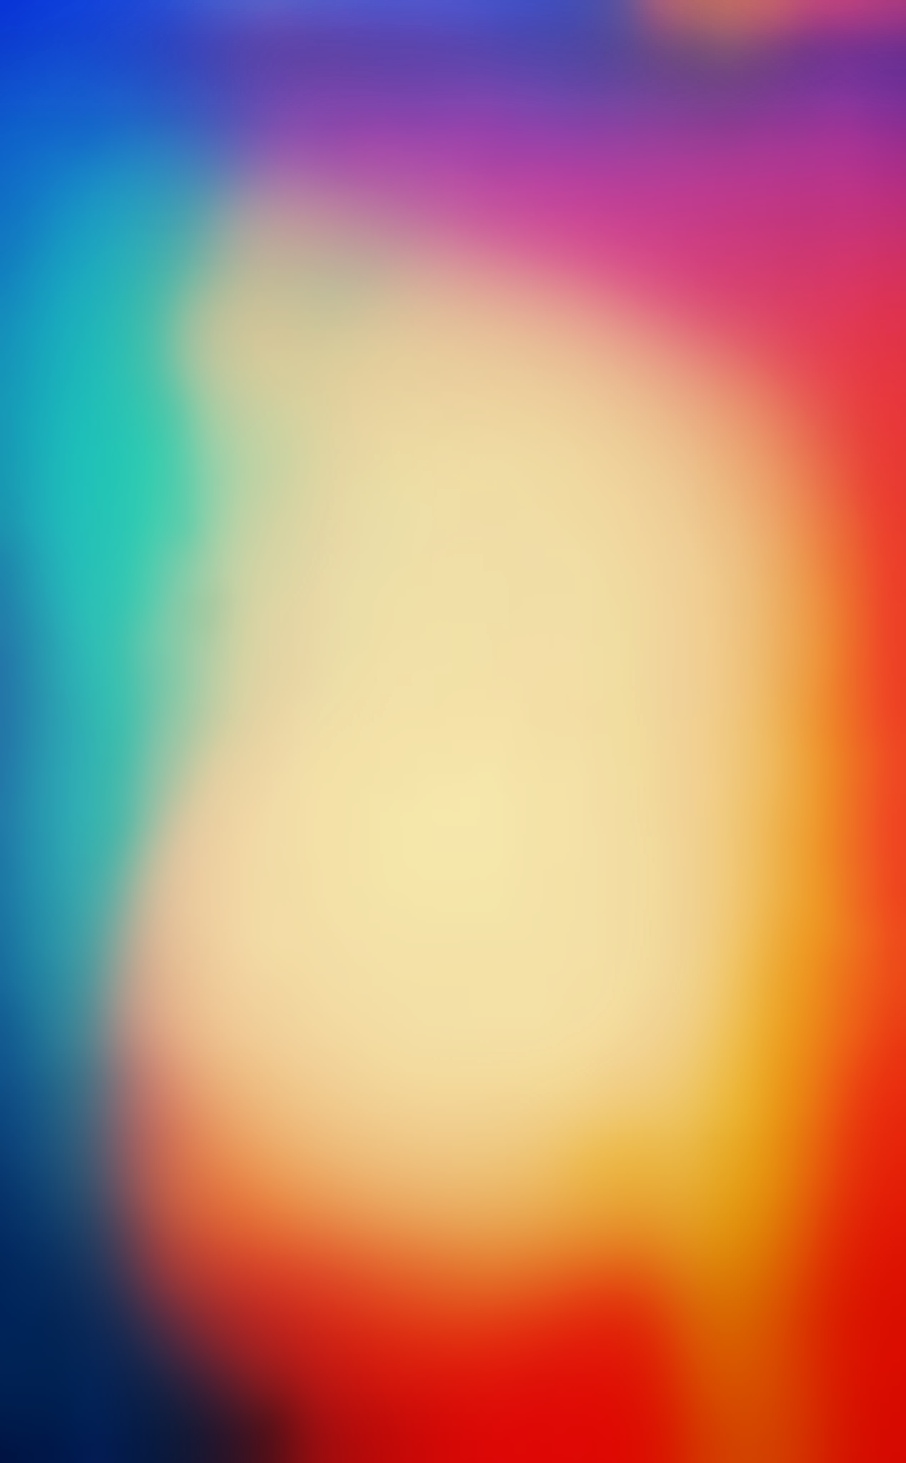 Bright Colors Iphone Wallpaper - Flat Colorful Wallpaper Iphone - 906x1463  Wallpaper 